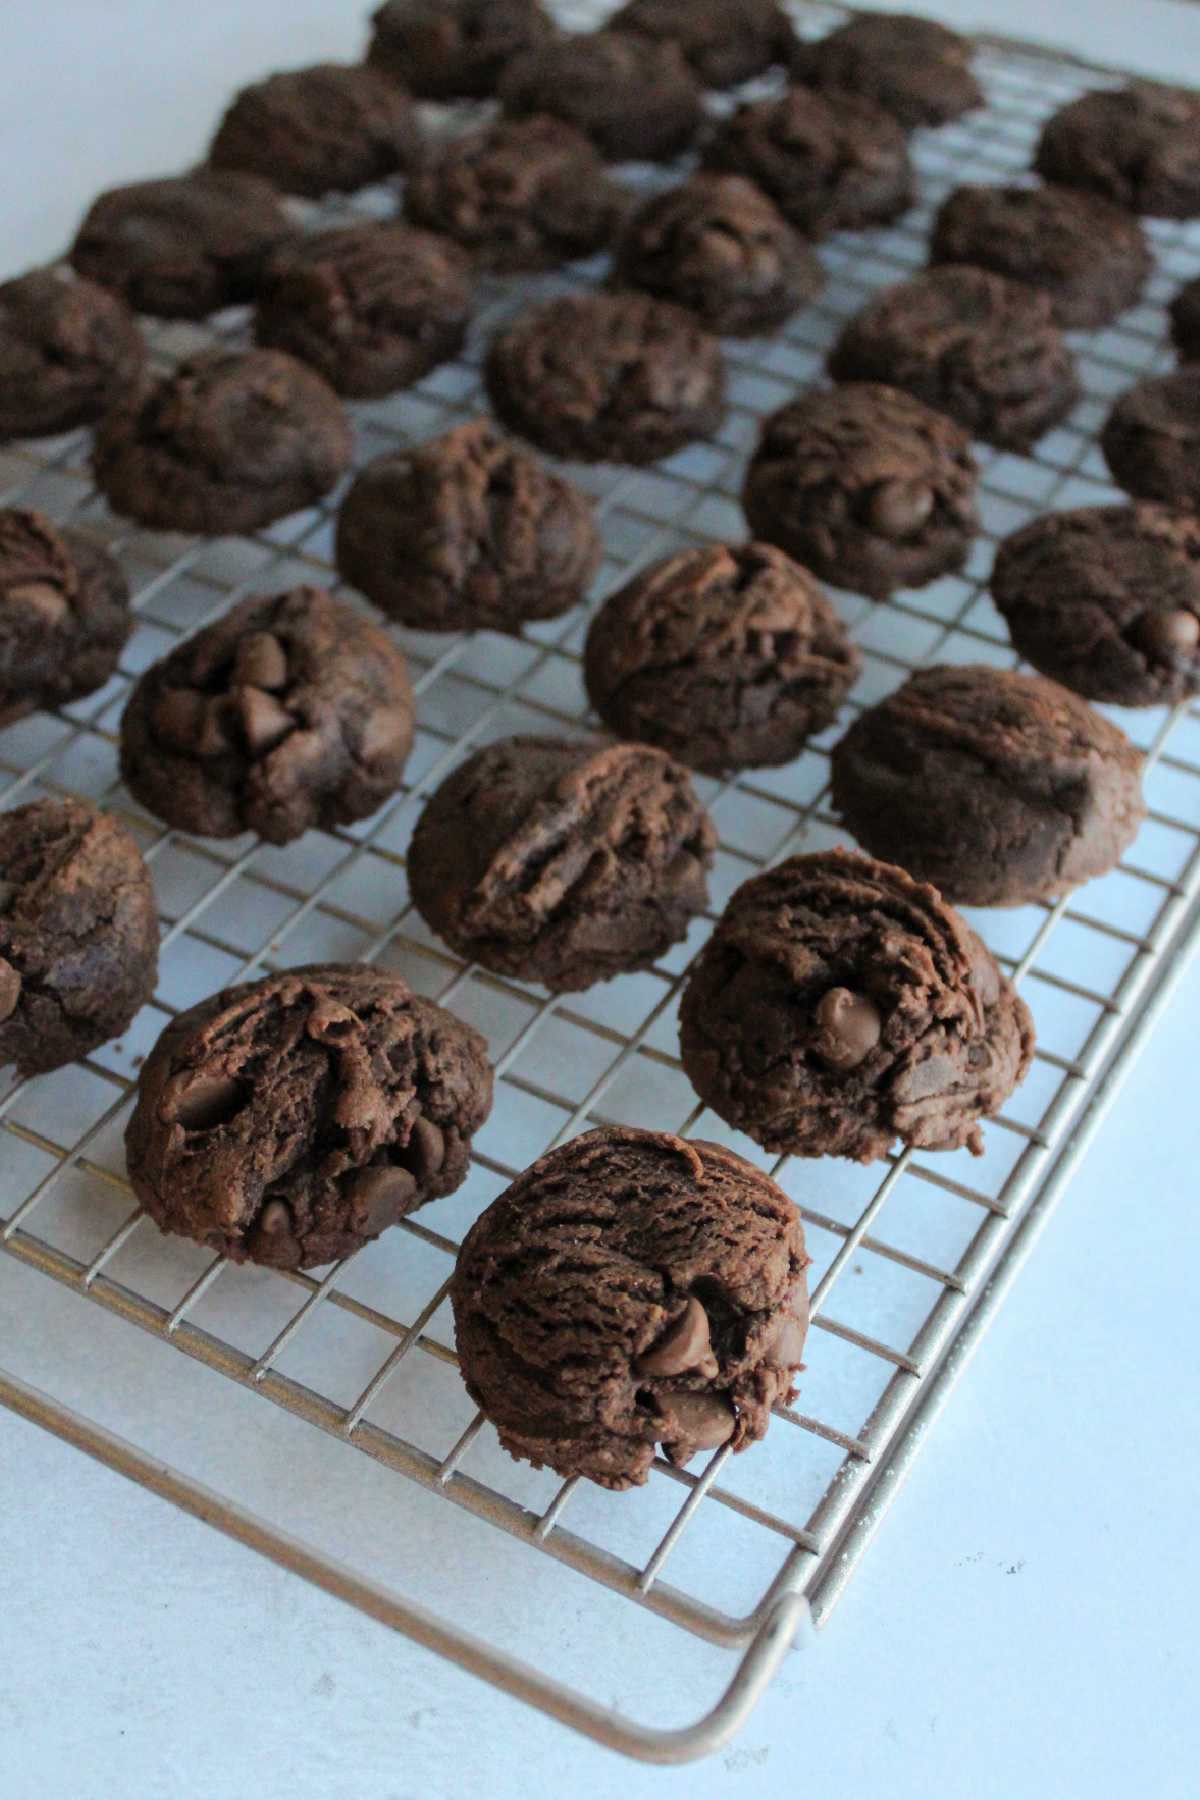 Baked brownie mix cookies on wire cooling rack.